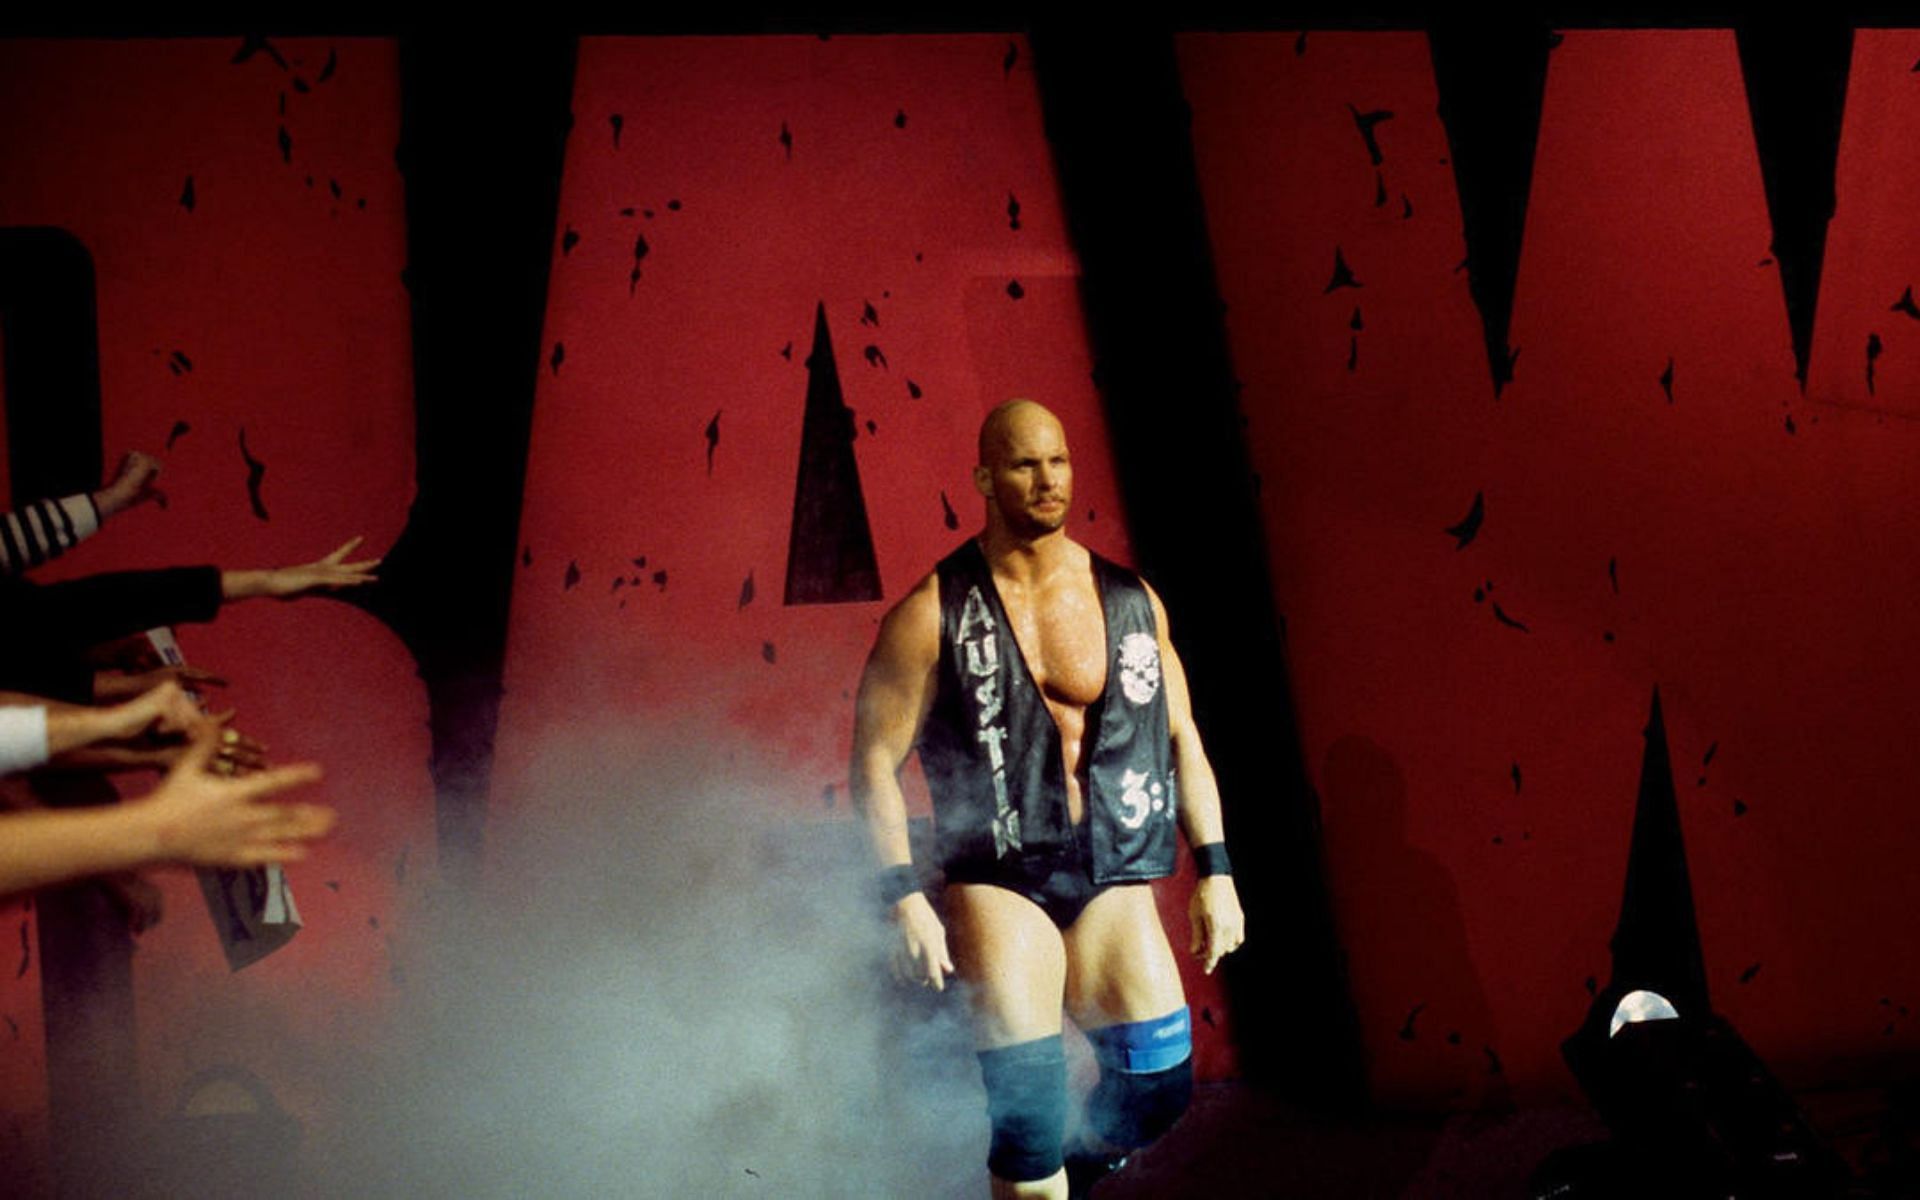 Steve Austin competed at WrestleMania 38!